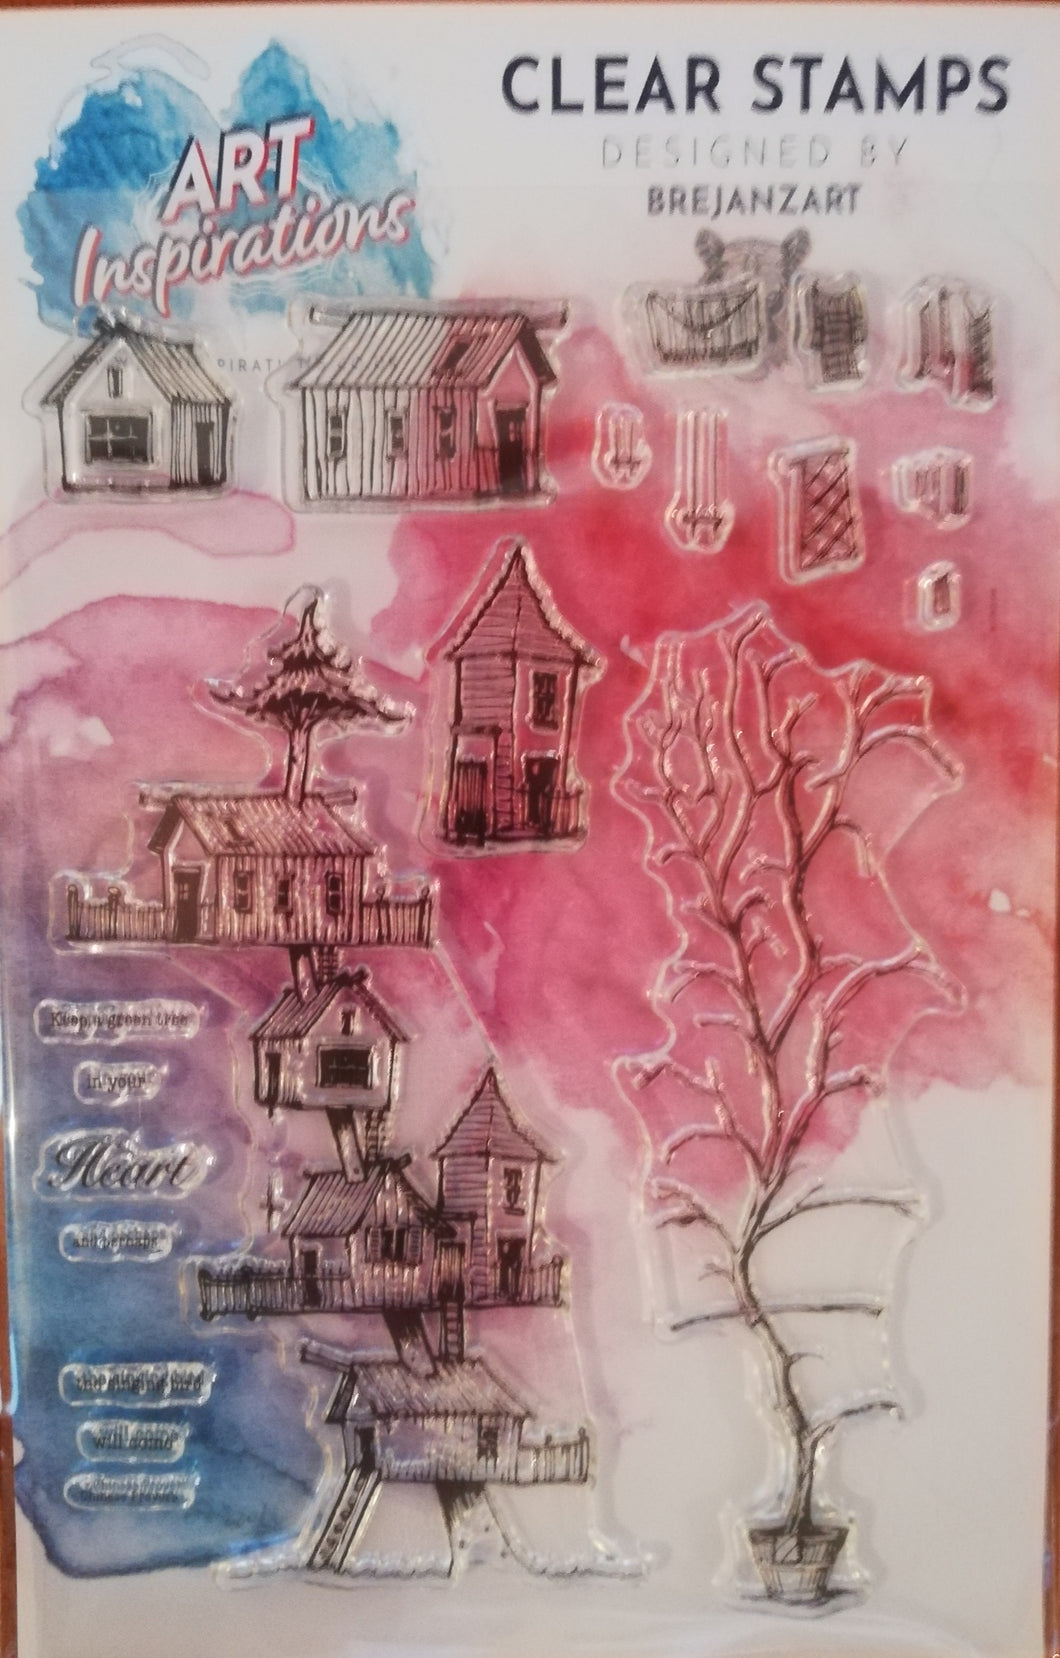 Art Inspirations with Brejanzart A5 Stamp Set - Tree Home - 20 Stamps